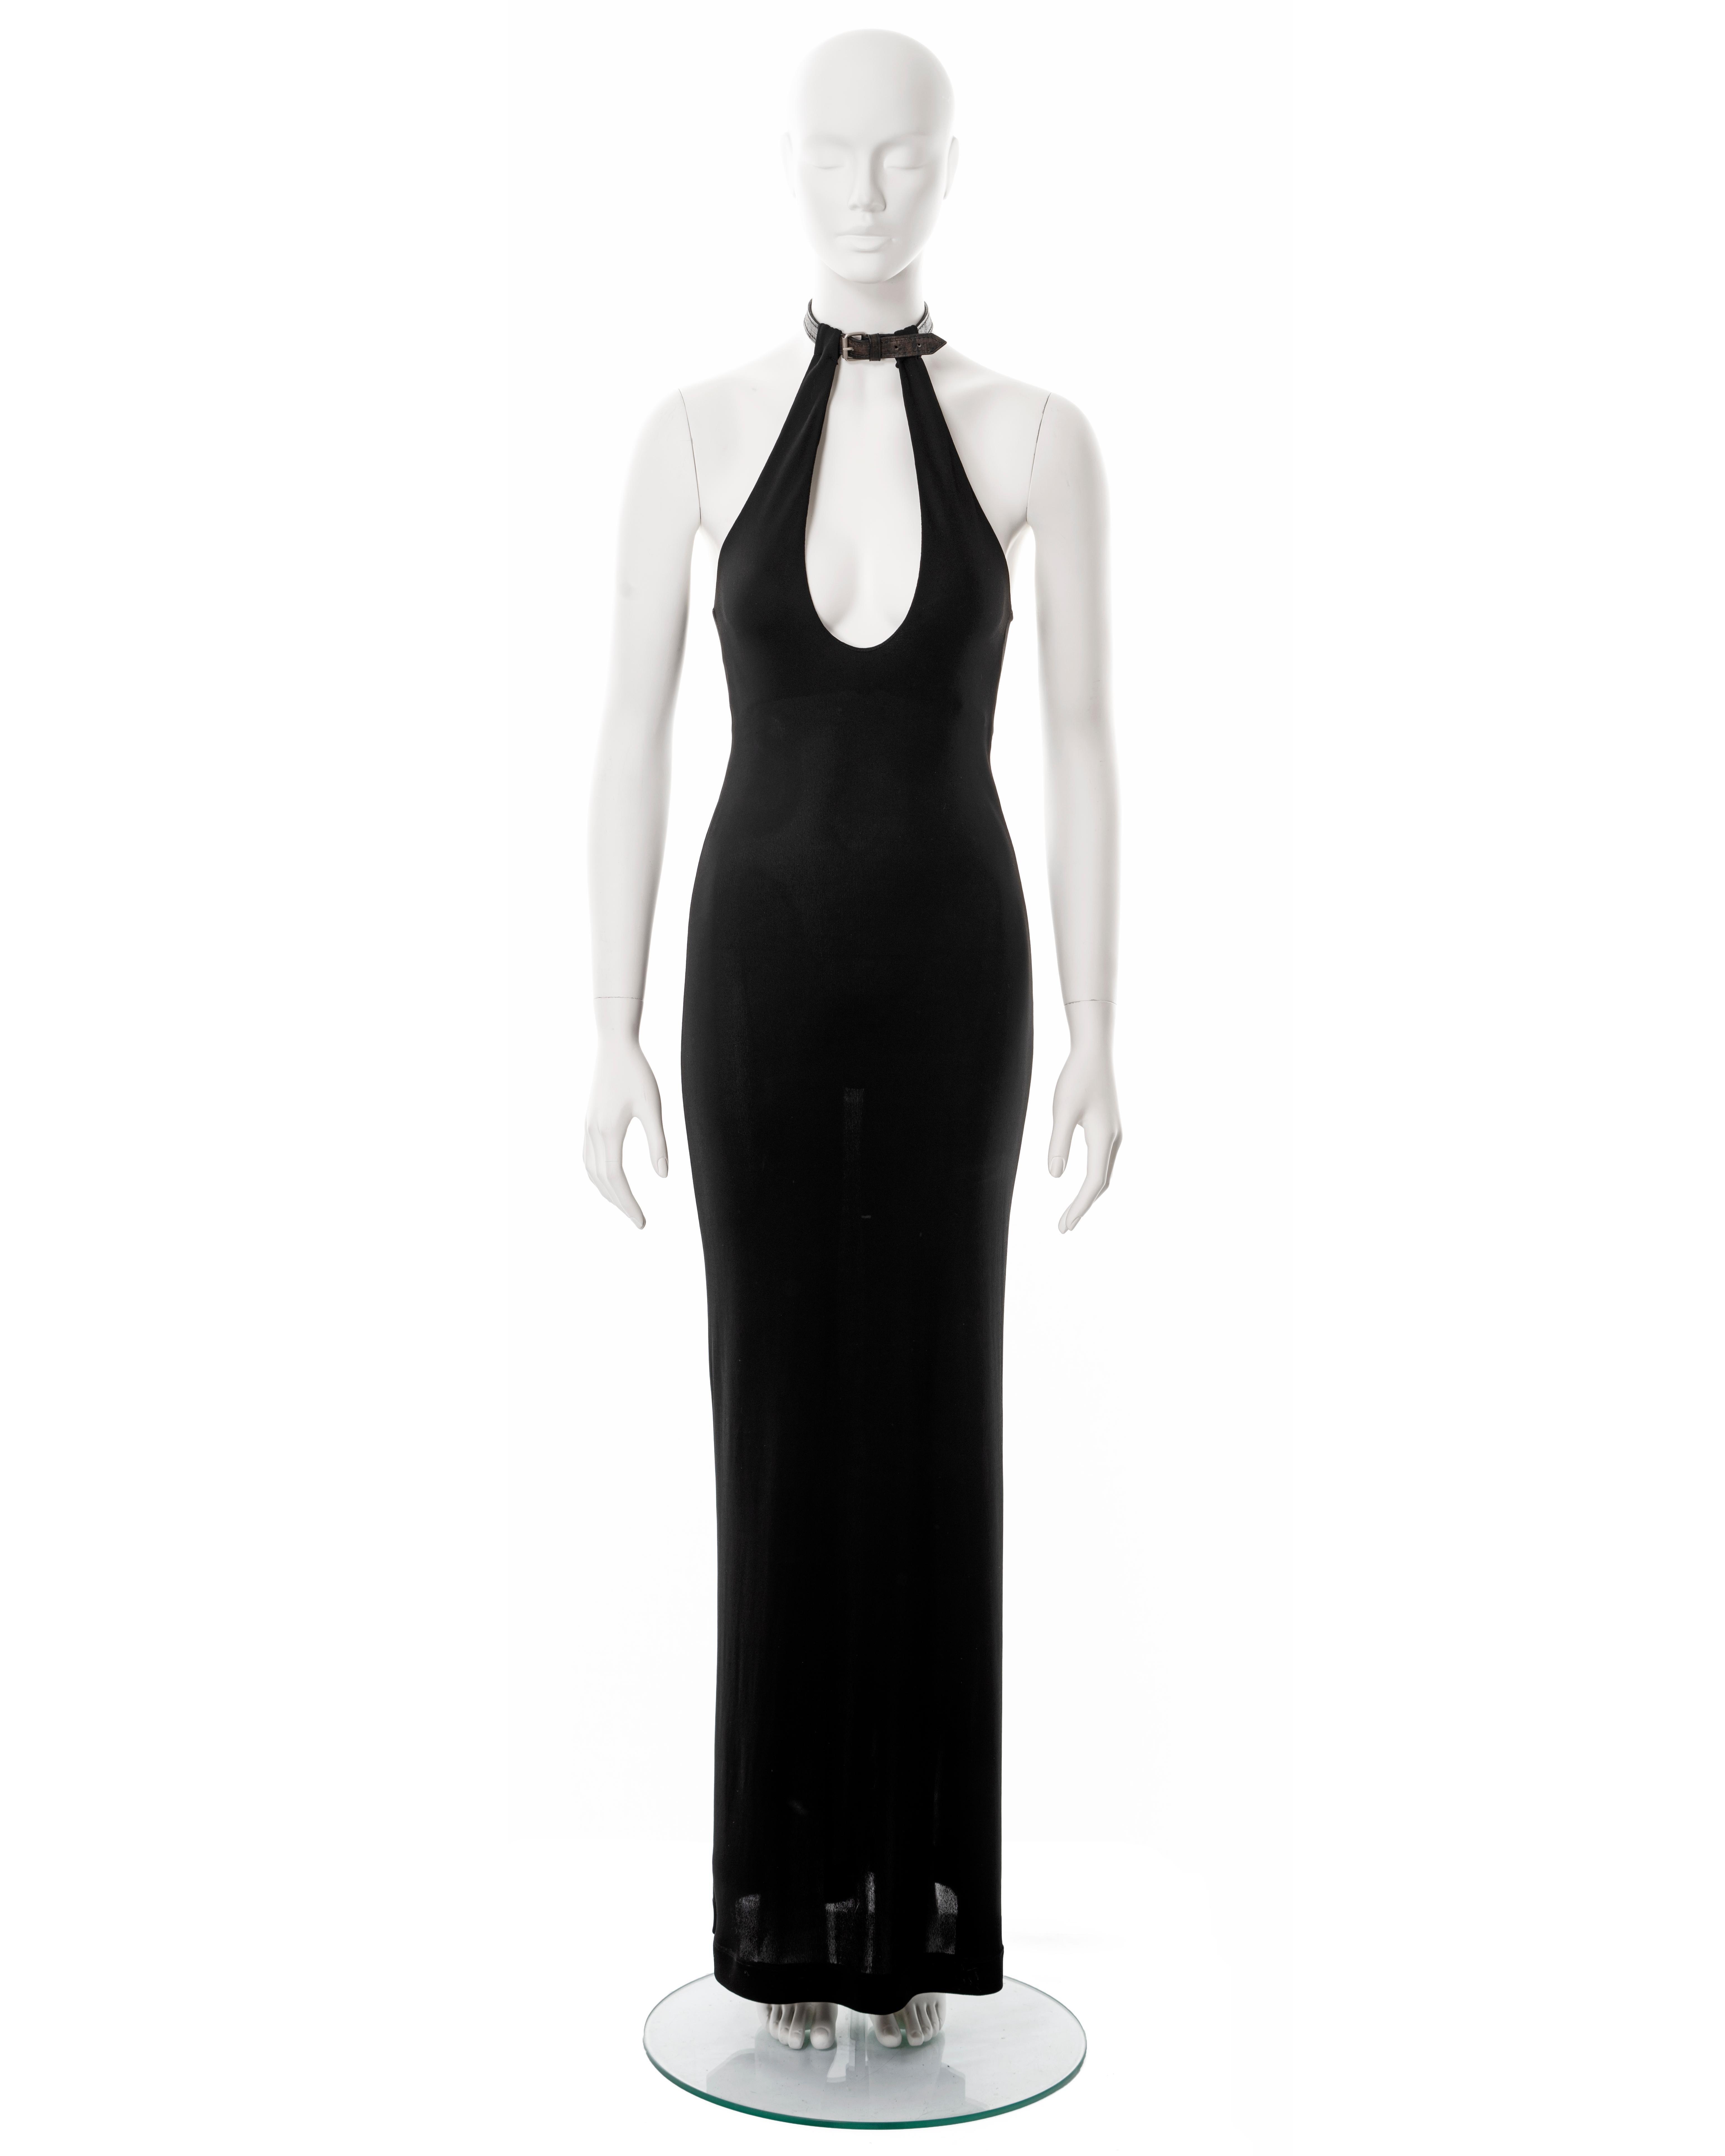 ▪ Jean Paul Gaultier black halter neck maxi dress
▪ Sold by One of a Kind Archive
▪ Spring-Summer 2001
▪ Constructed from double-layered black rayon jersey 
▪ Leather choker with metal buckle 
▪ Plunging keyhole neckline 
▪ IT 42 - FR 38 - UK 10
▪